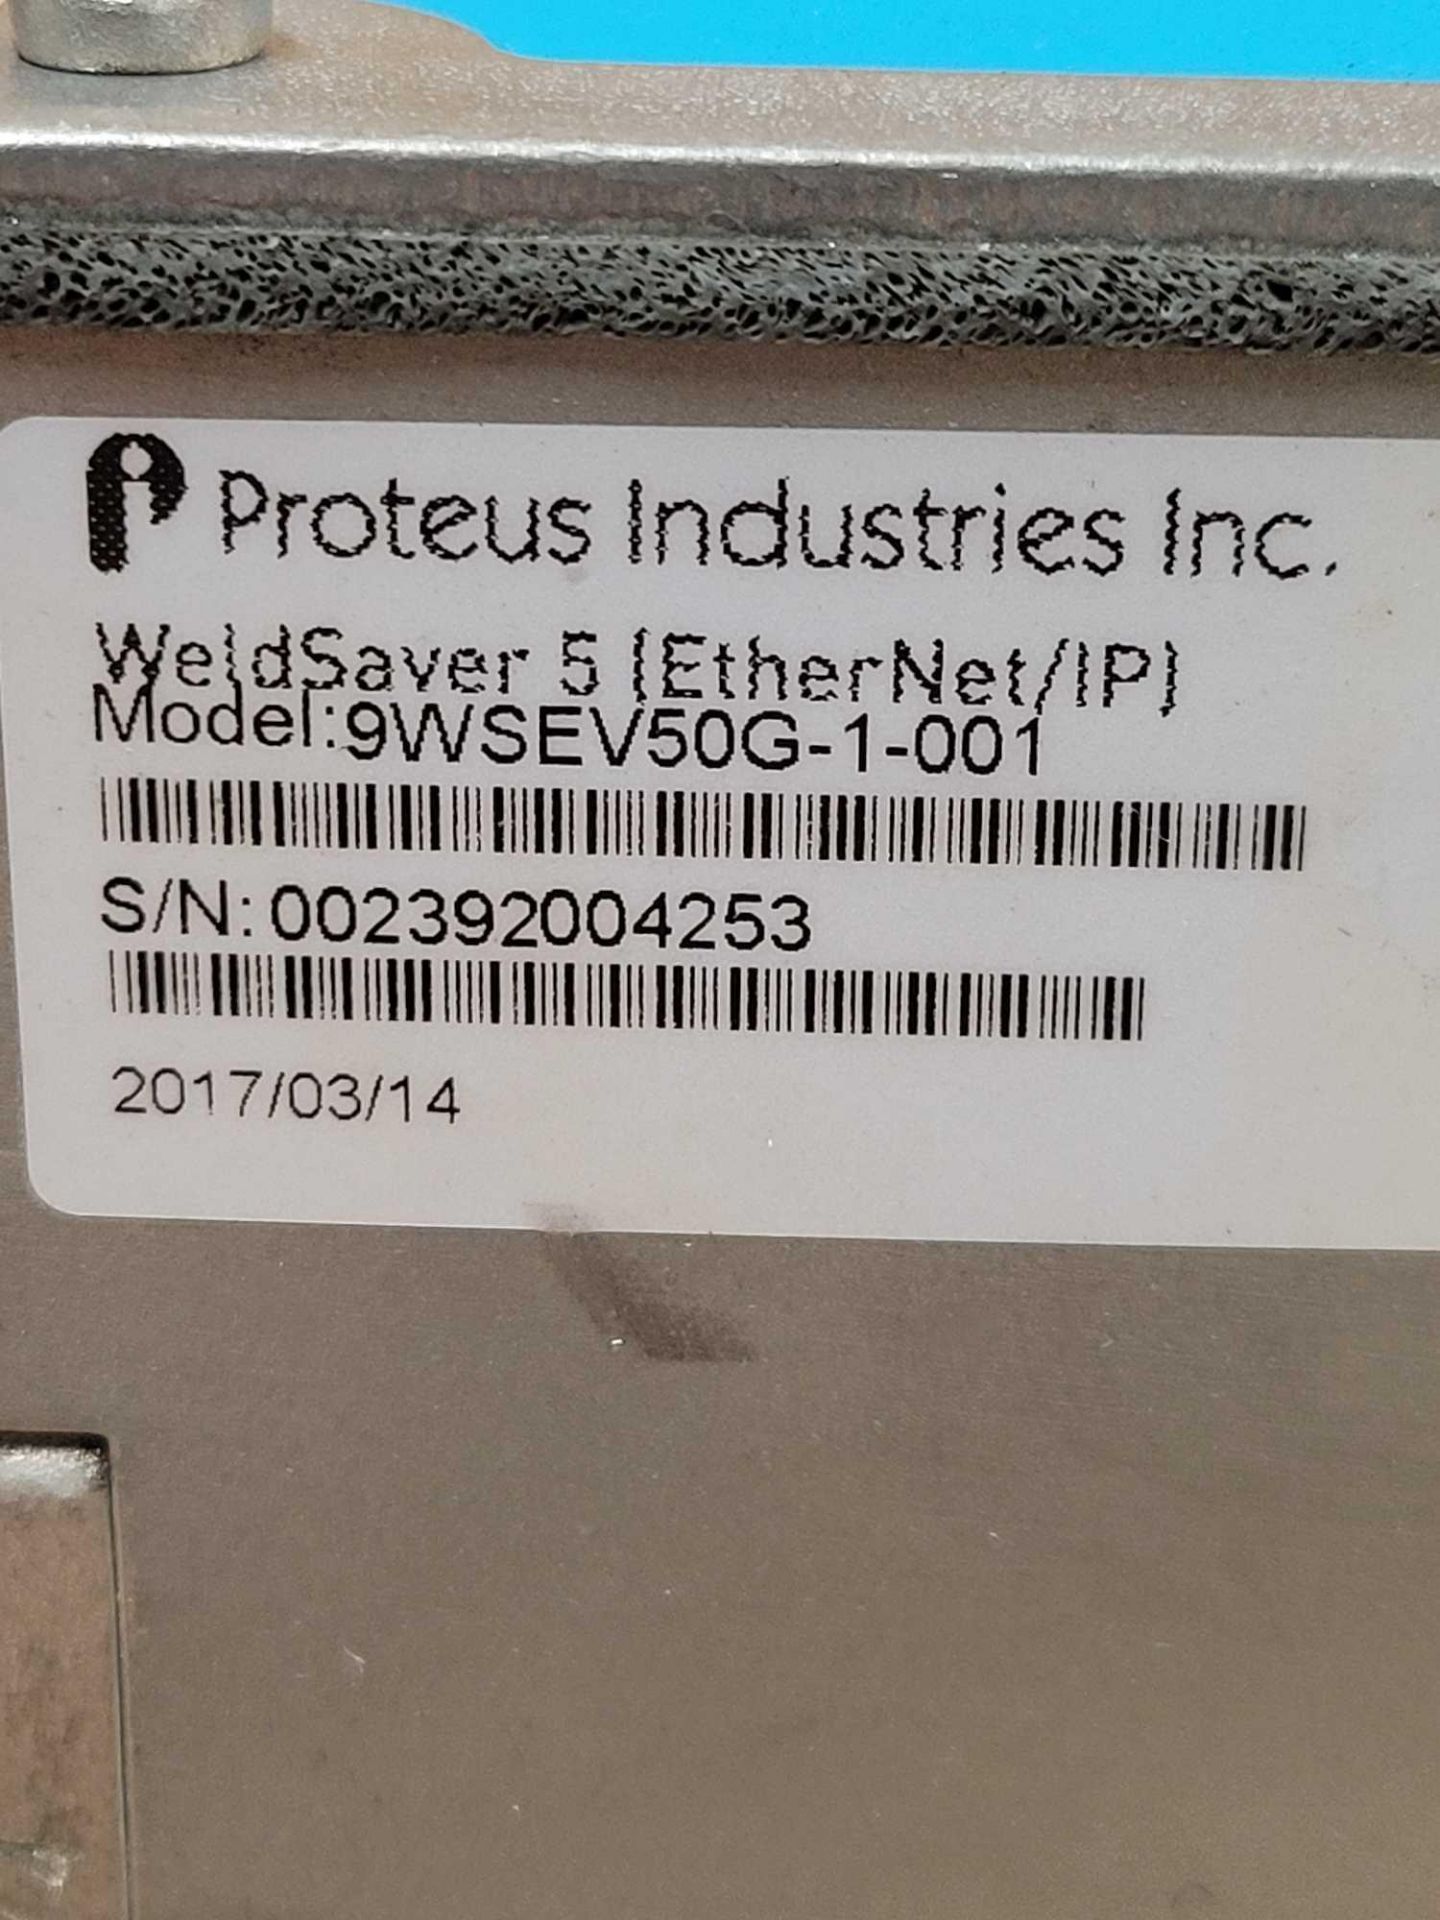 LOT OF 2 / (1) PROTEUS INDUSTRIES 9WSEV50G-1-001 with RAM 78000-001 and RAM MAC9000-001ESG / (1) PRO - Image 3 of 17